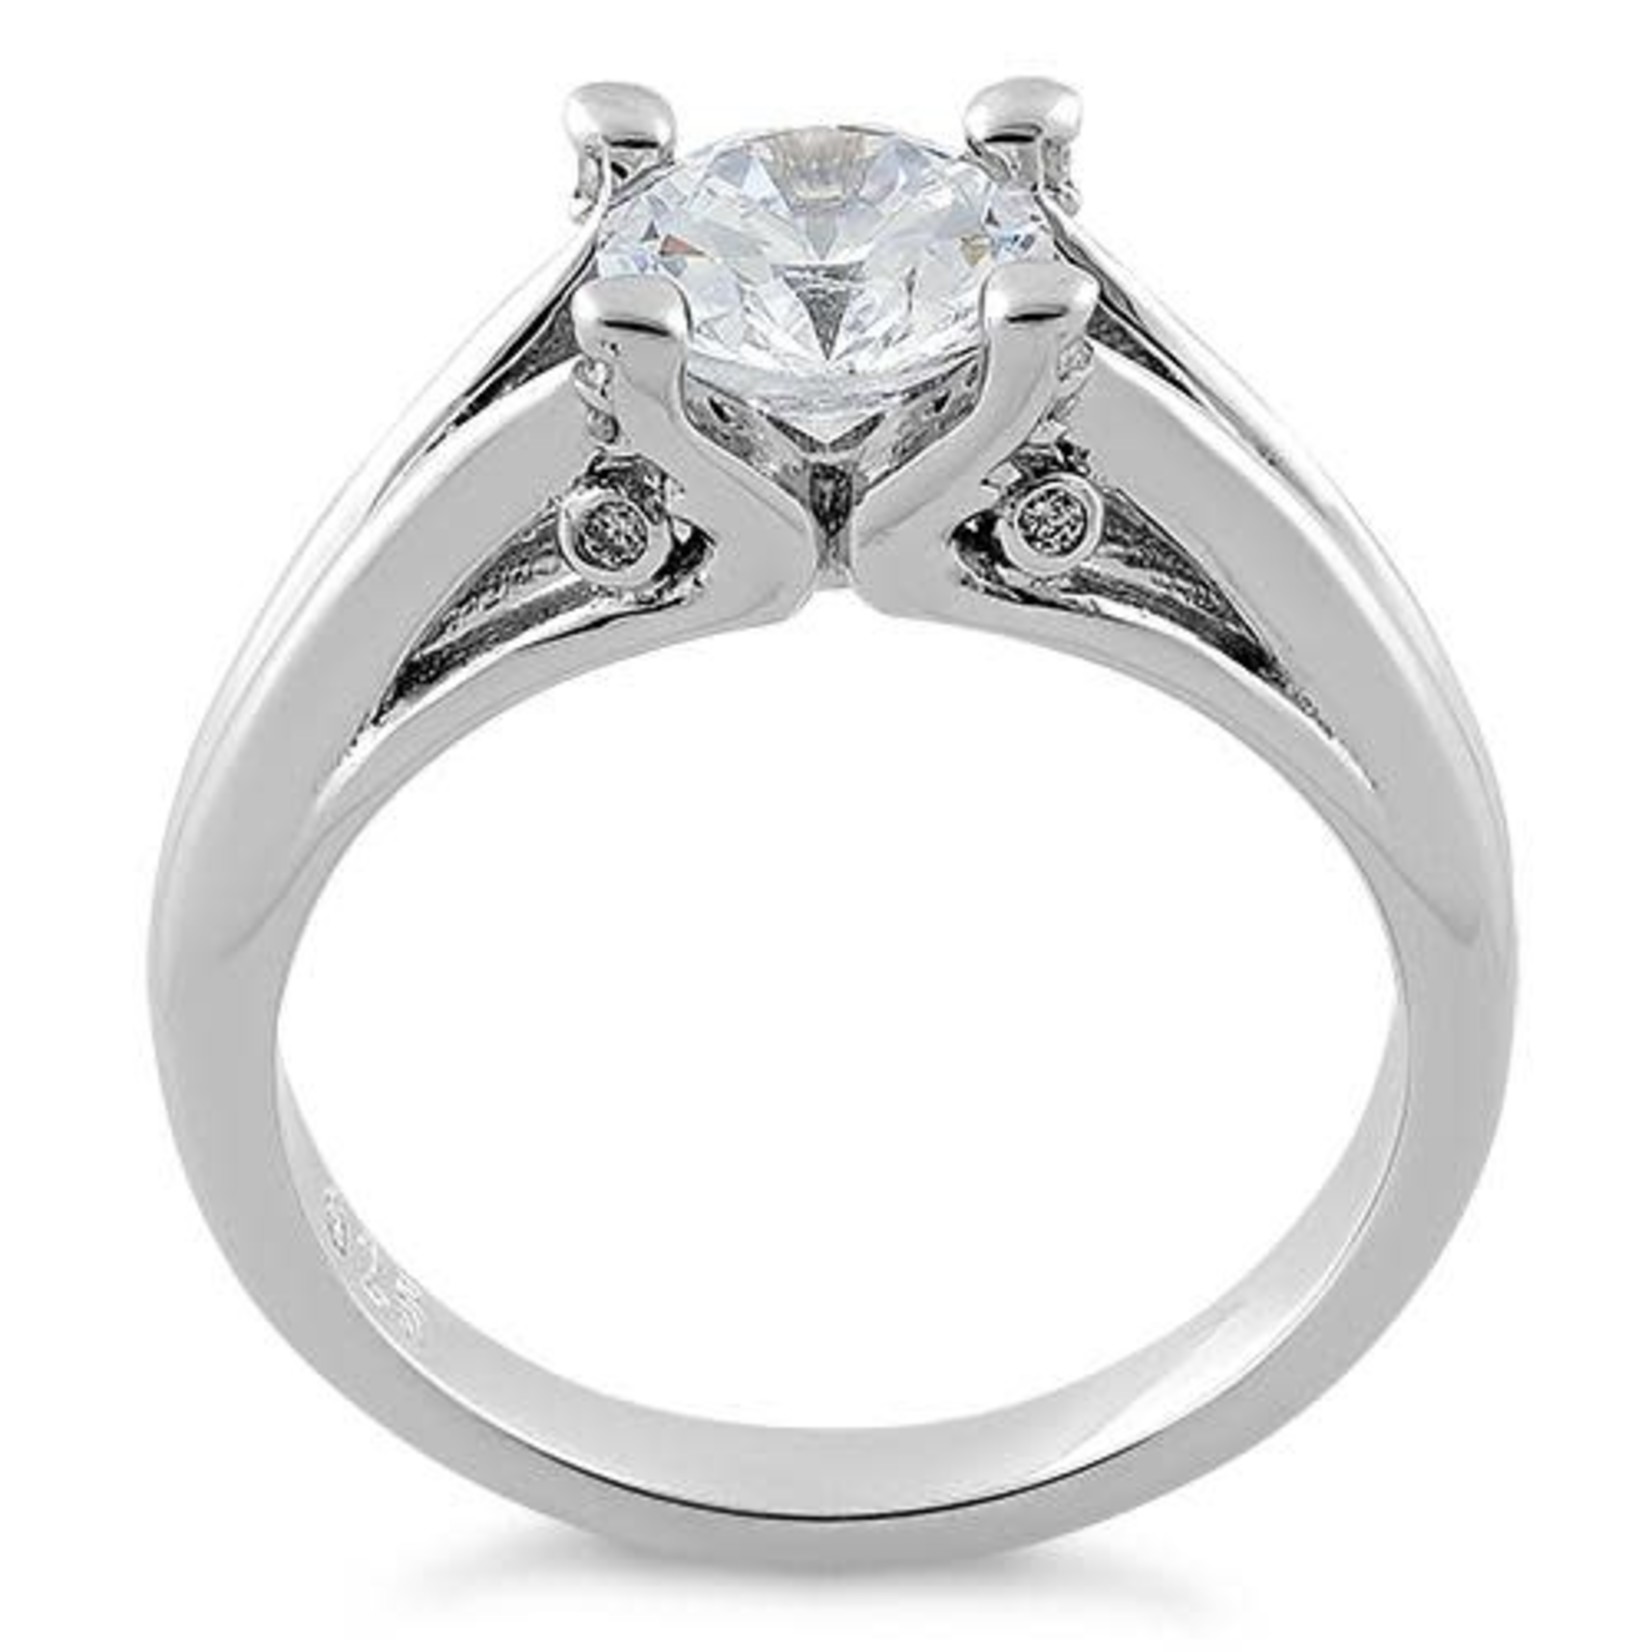 RLD Sterling Silver 1.5c Round Solitaire